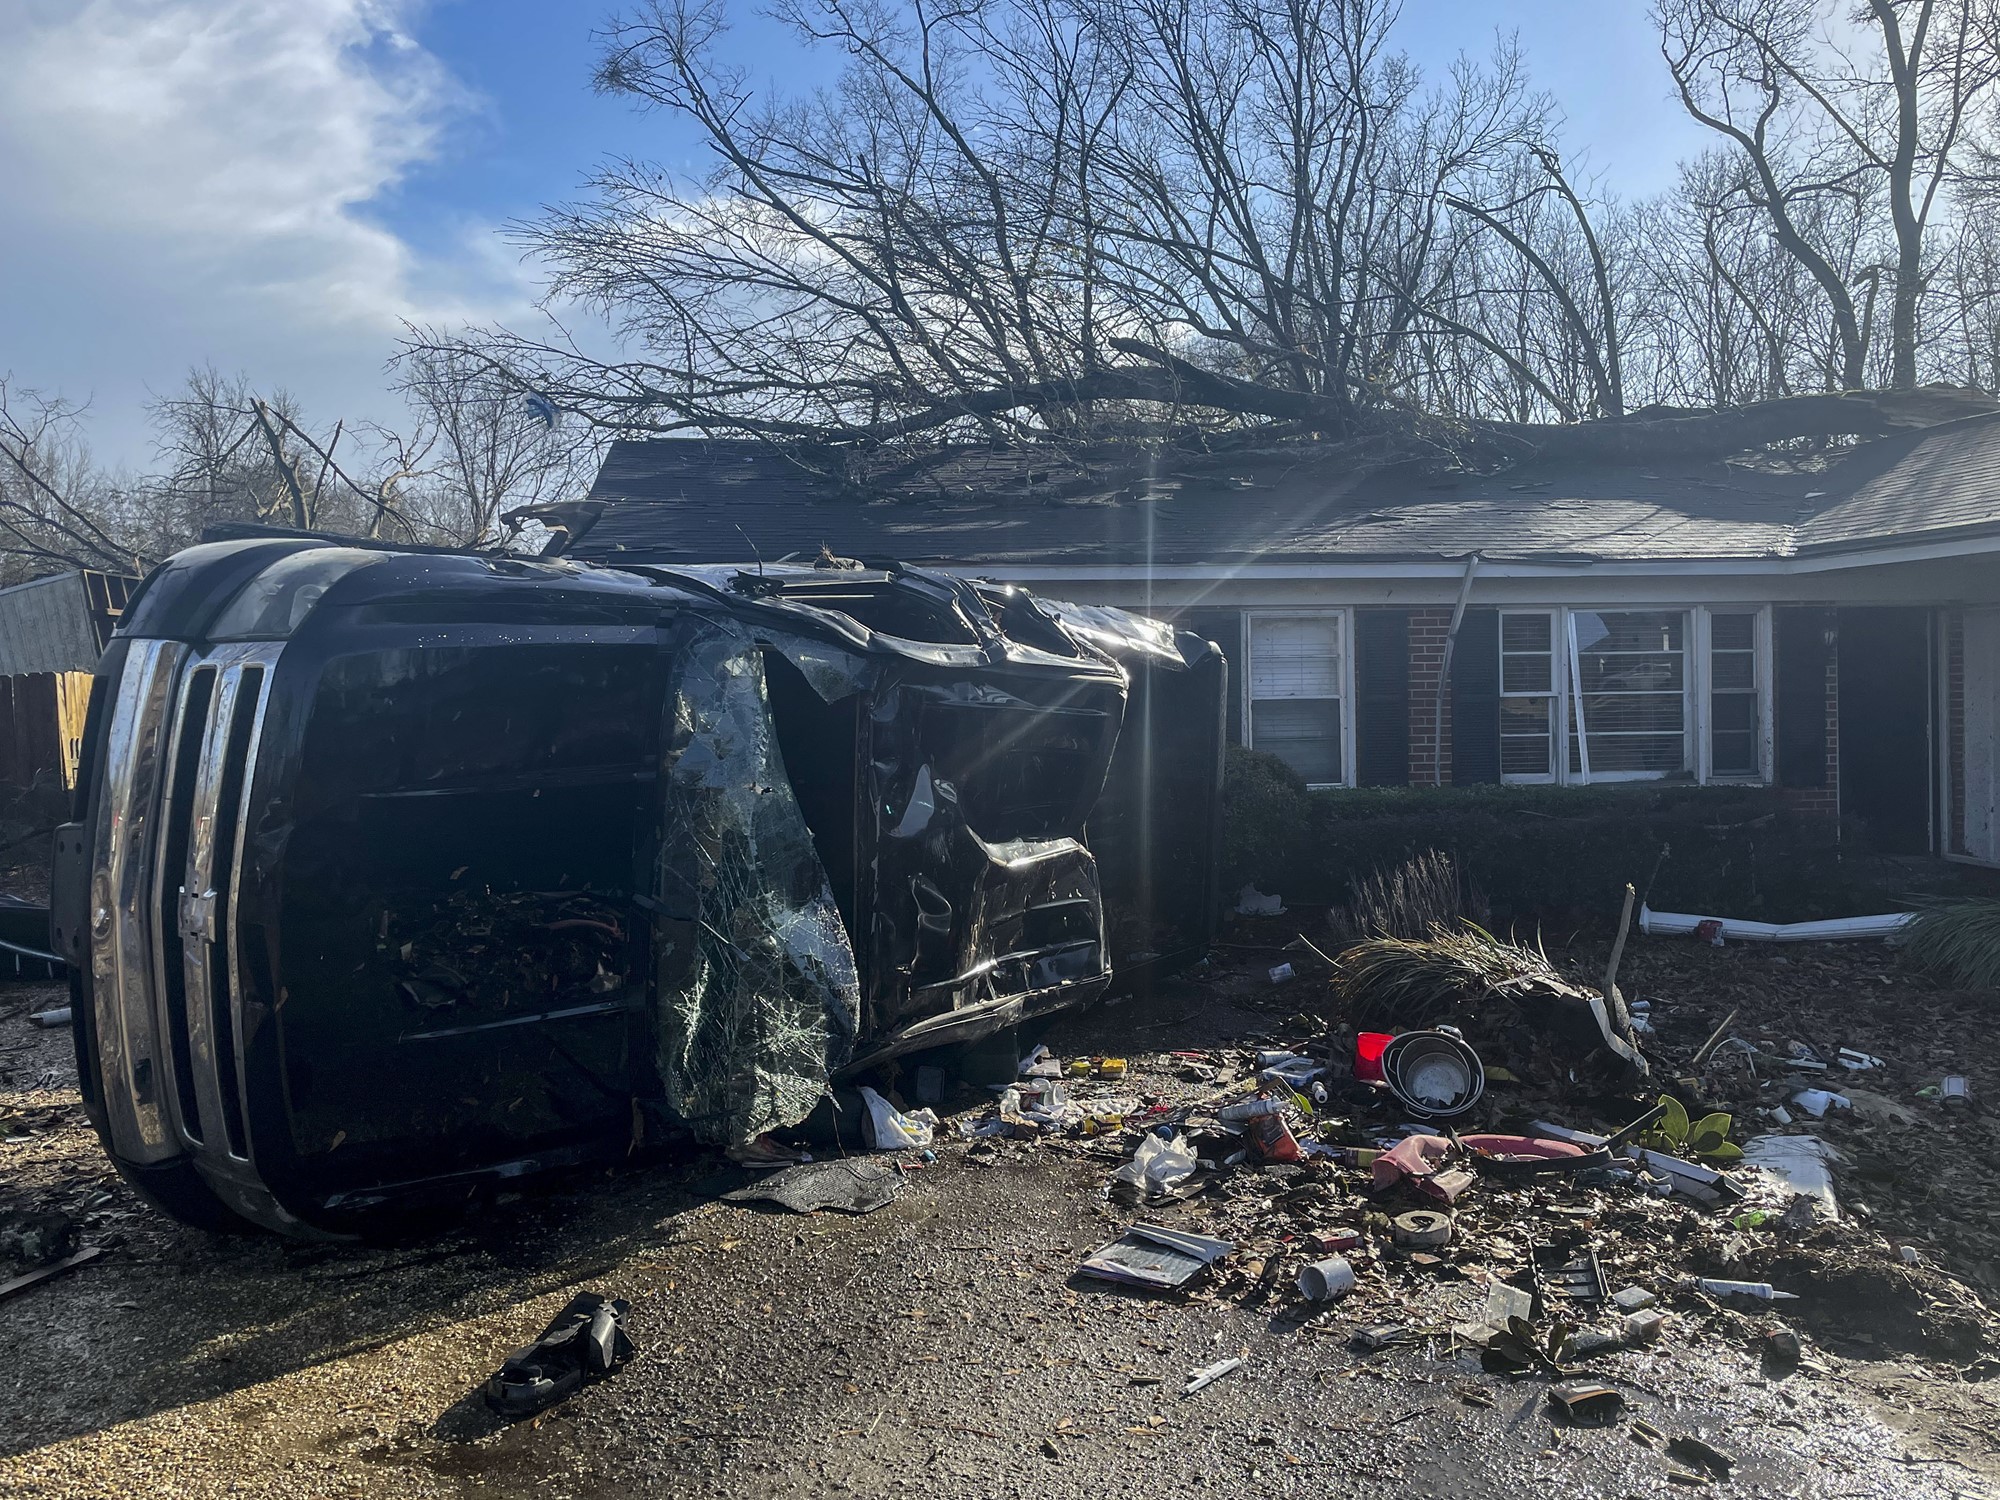 A damaged car is pictured on its side in front of a home covered in debris.